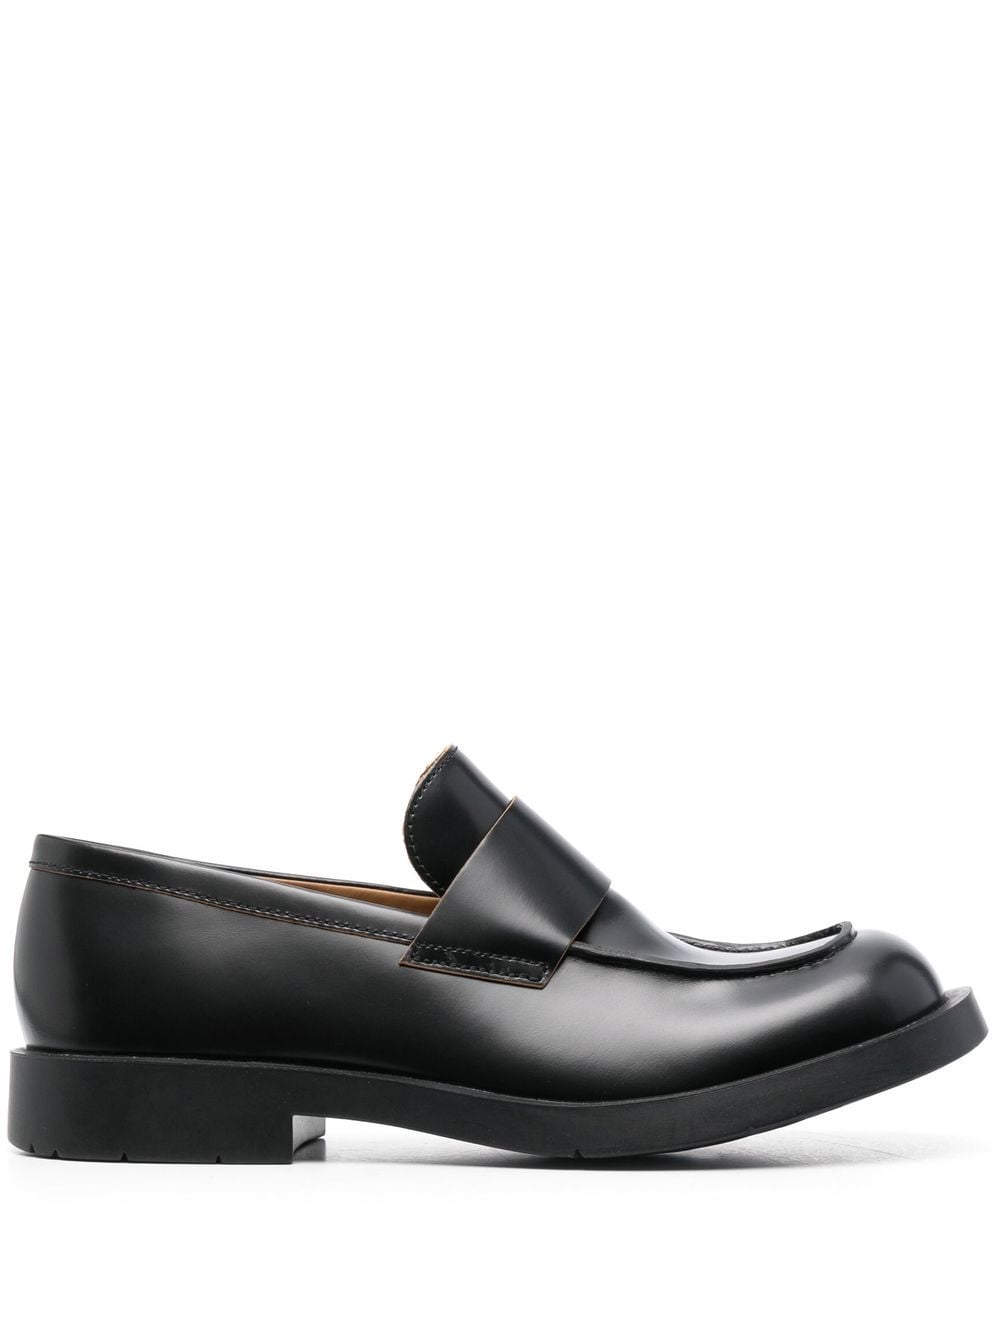 square-toe leather loafers